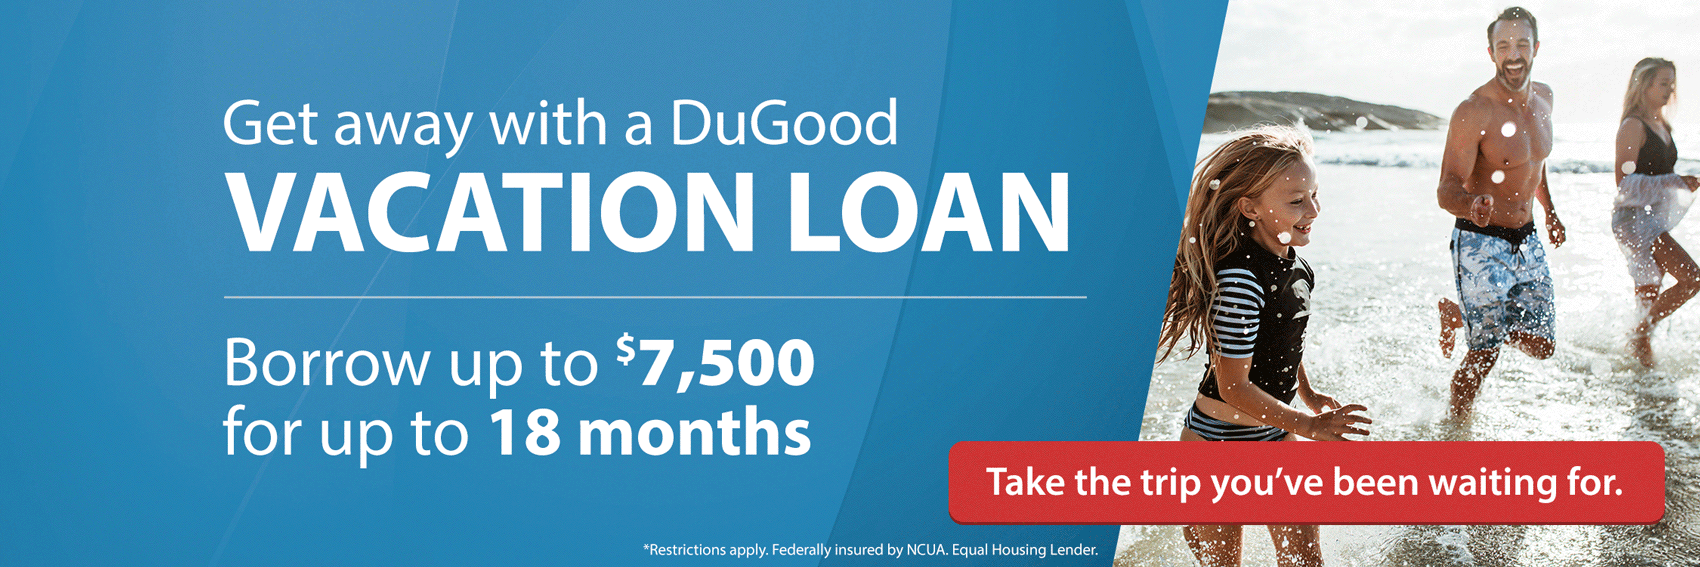 Get away with a DuGood Vacation Loan. Borrow up to $7,500 for up to 18 months. Take the trip you've been waiting for. Click to learn more. (*Restrictions apply. Federally insured by NCUA. Equal Housing Lender.)